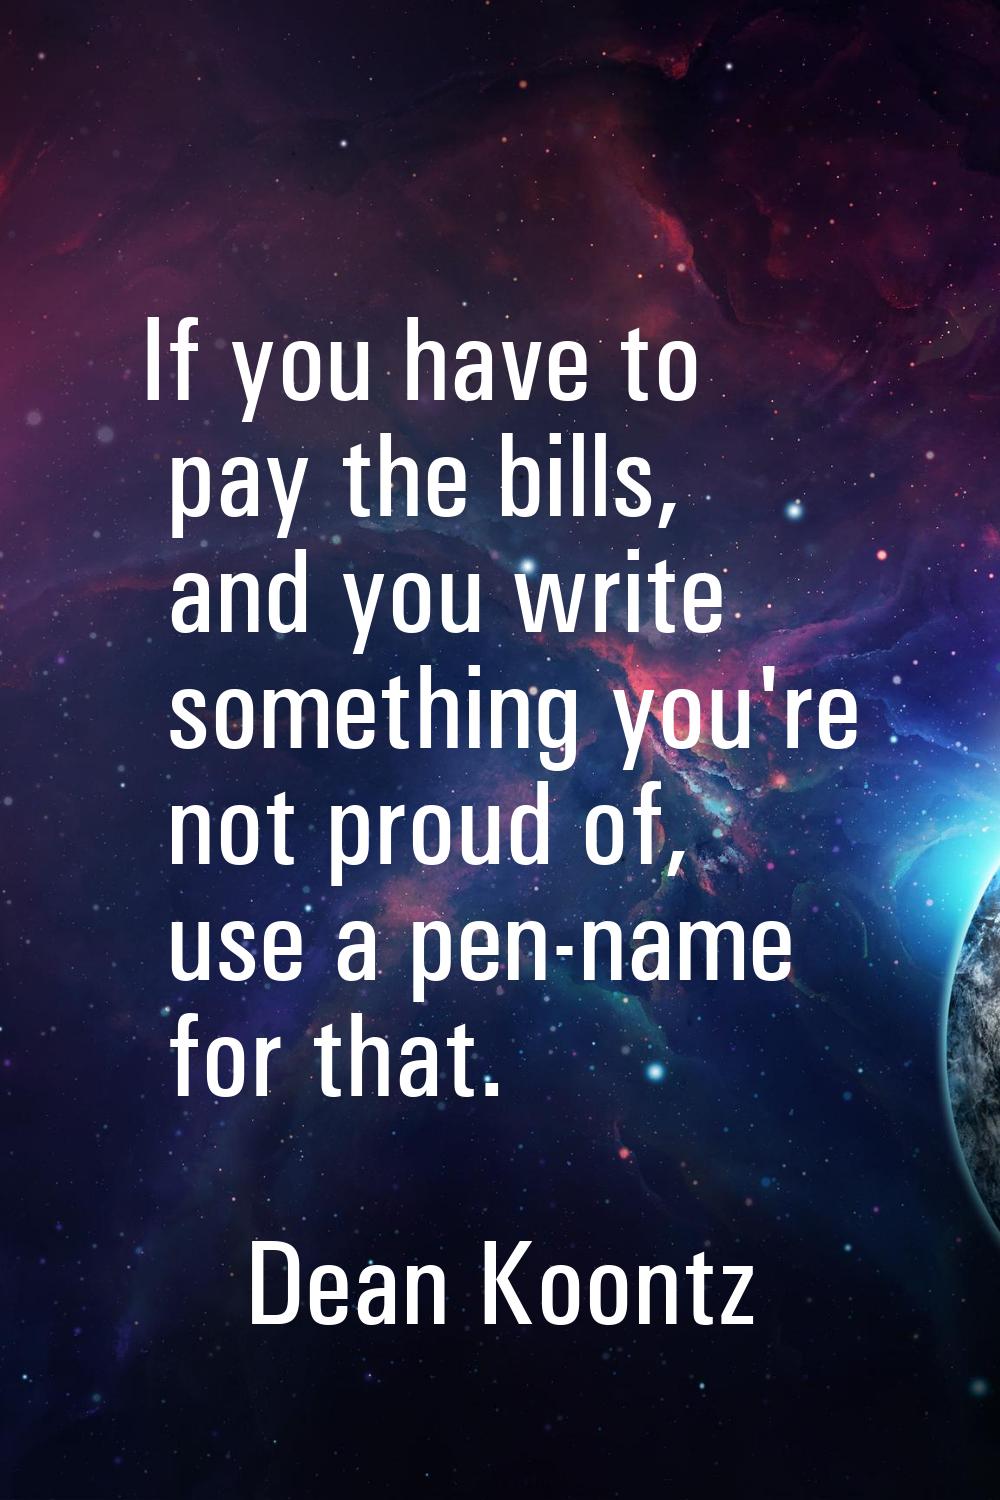 If you have to pay the bills, and you write something you're not proud of, use a pen-name for that.